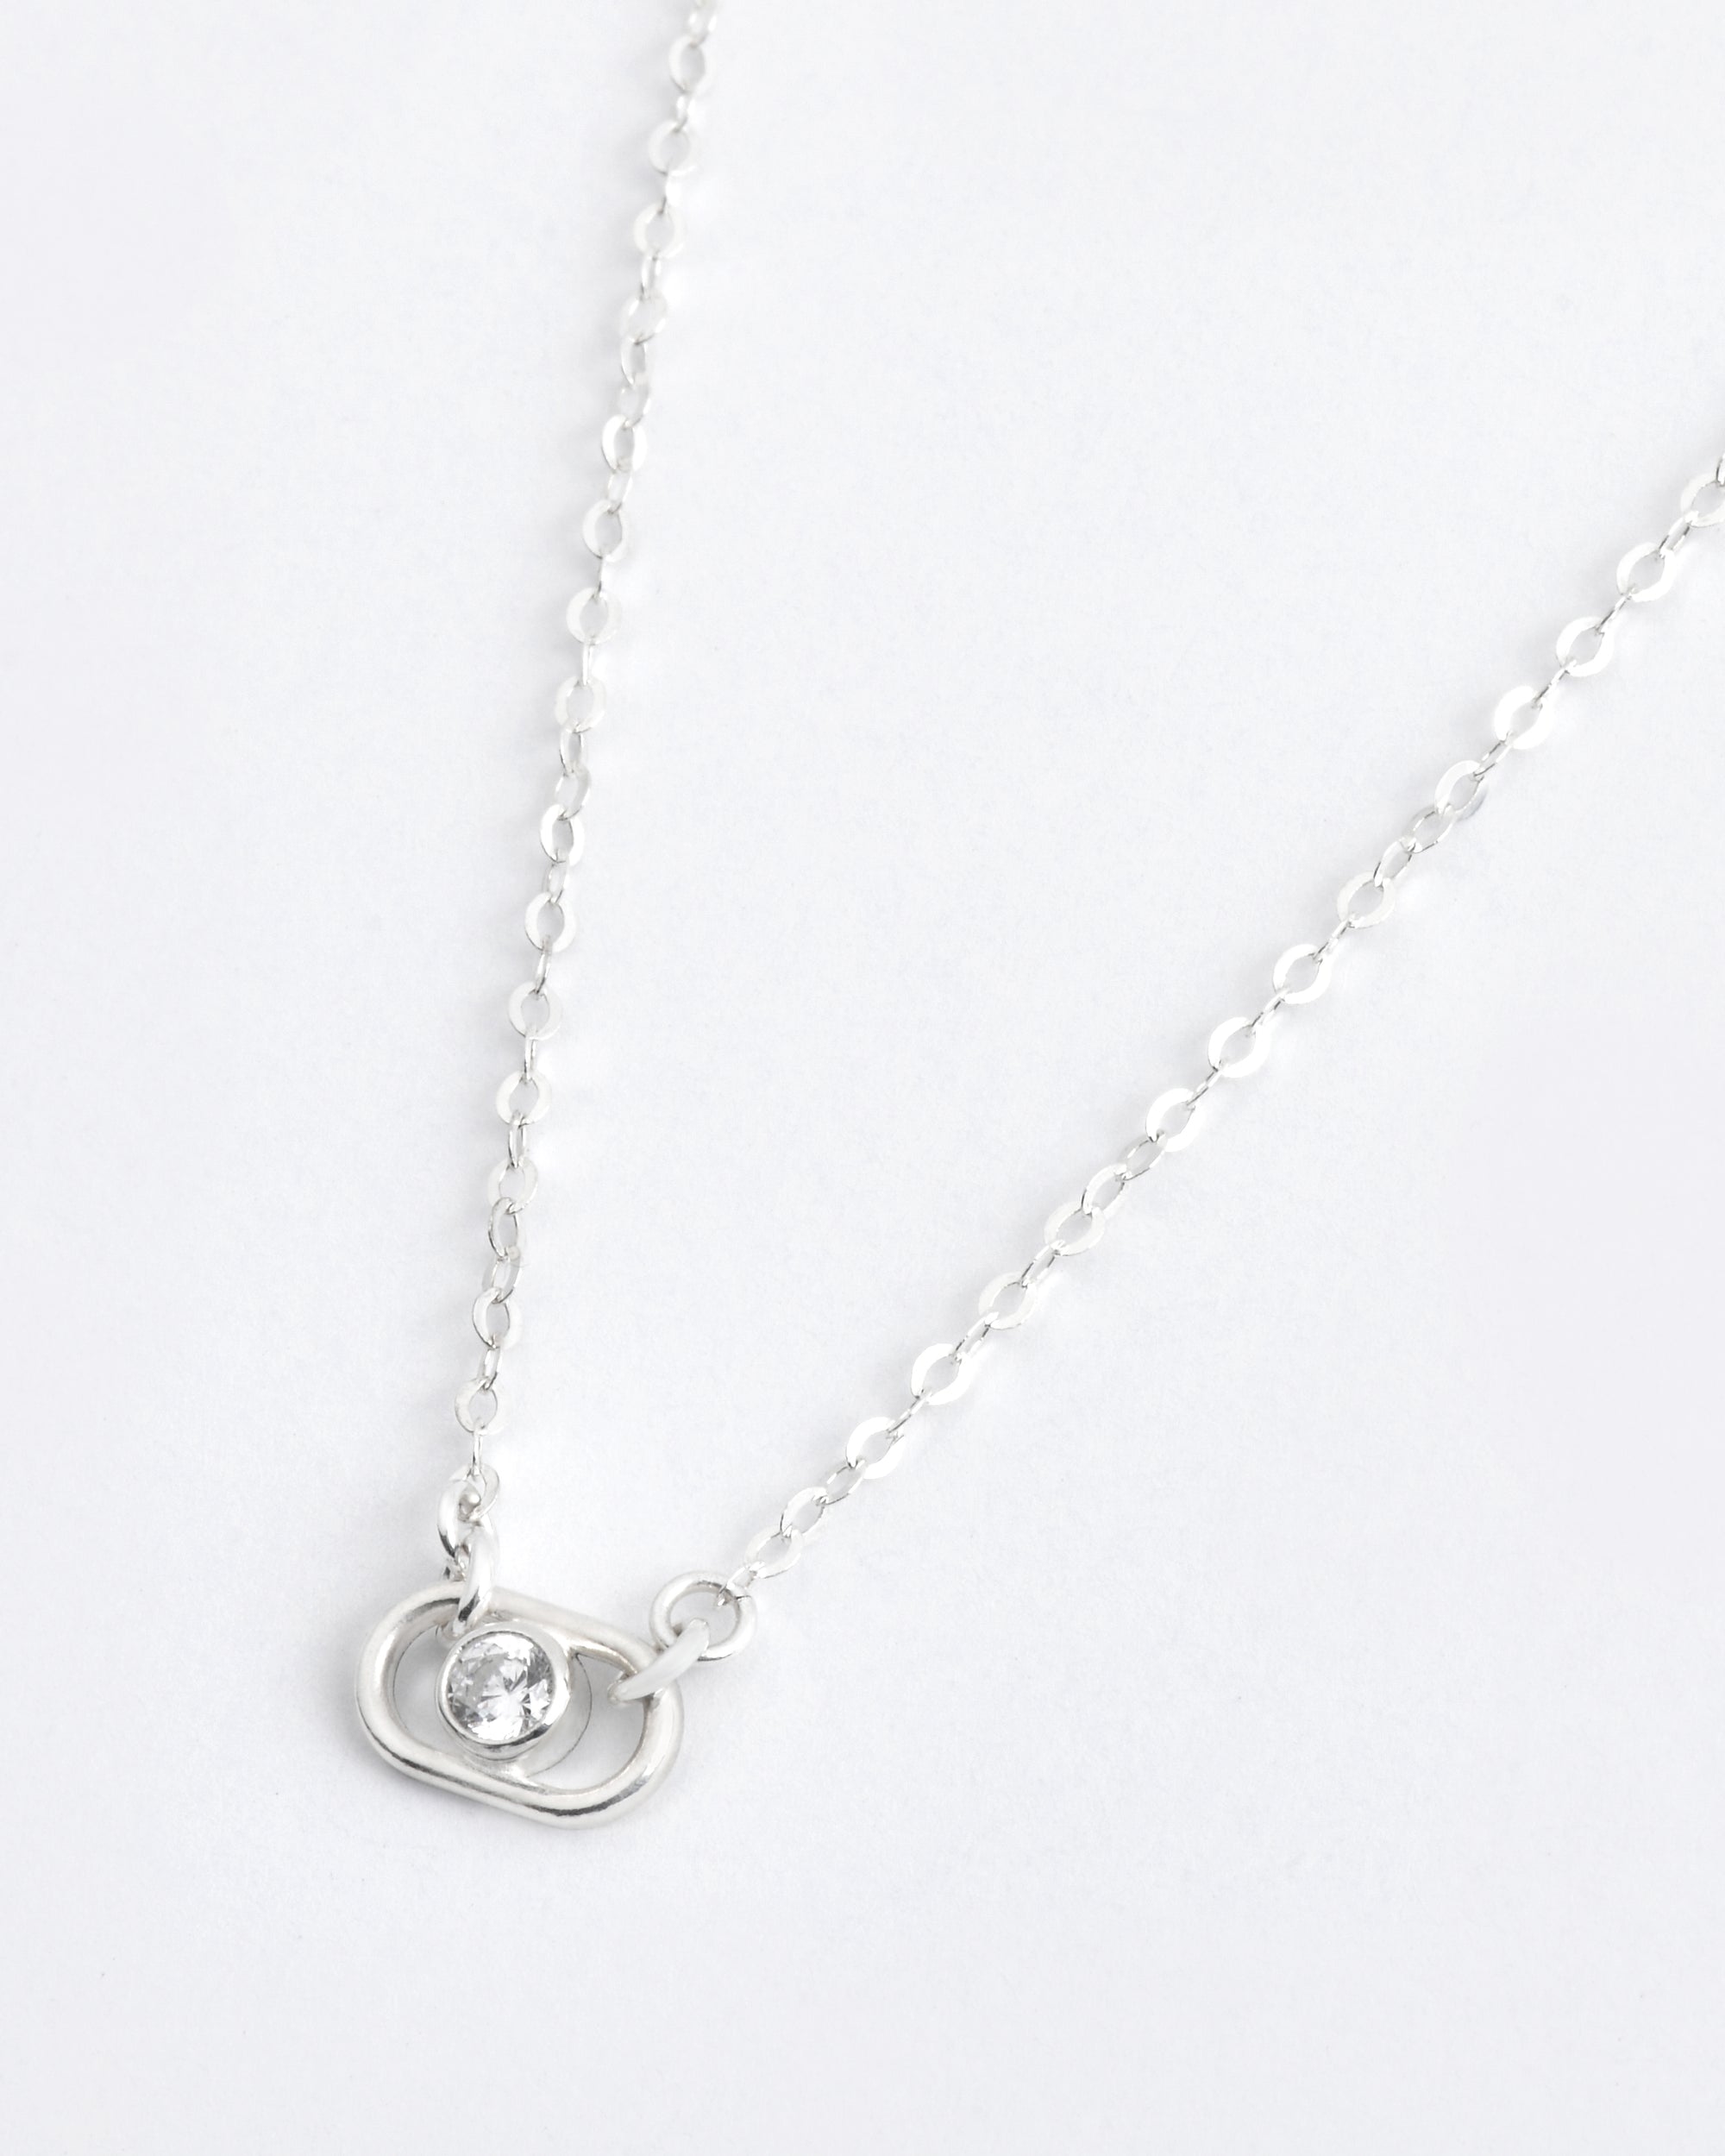 sterling silver necklace with a round diamond charm pendant